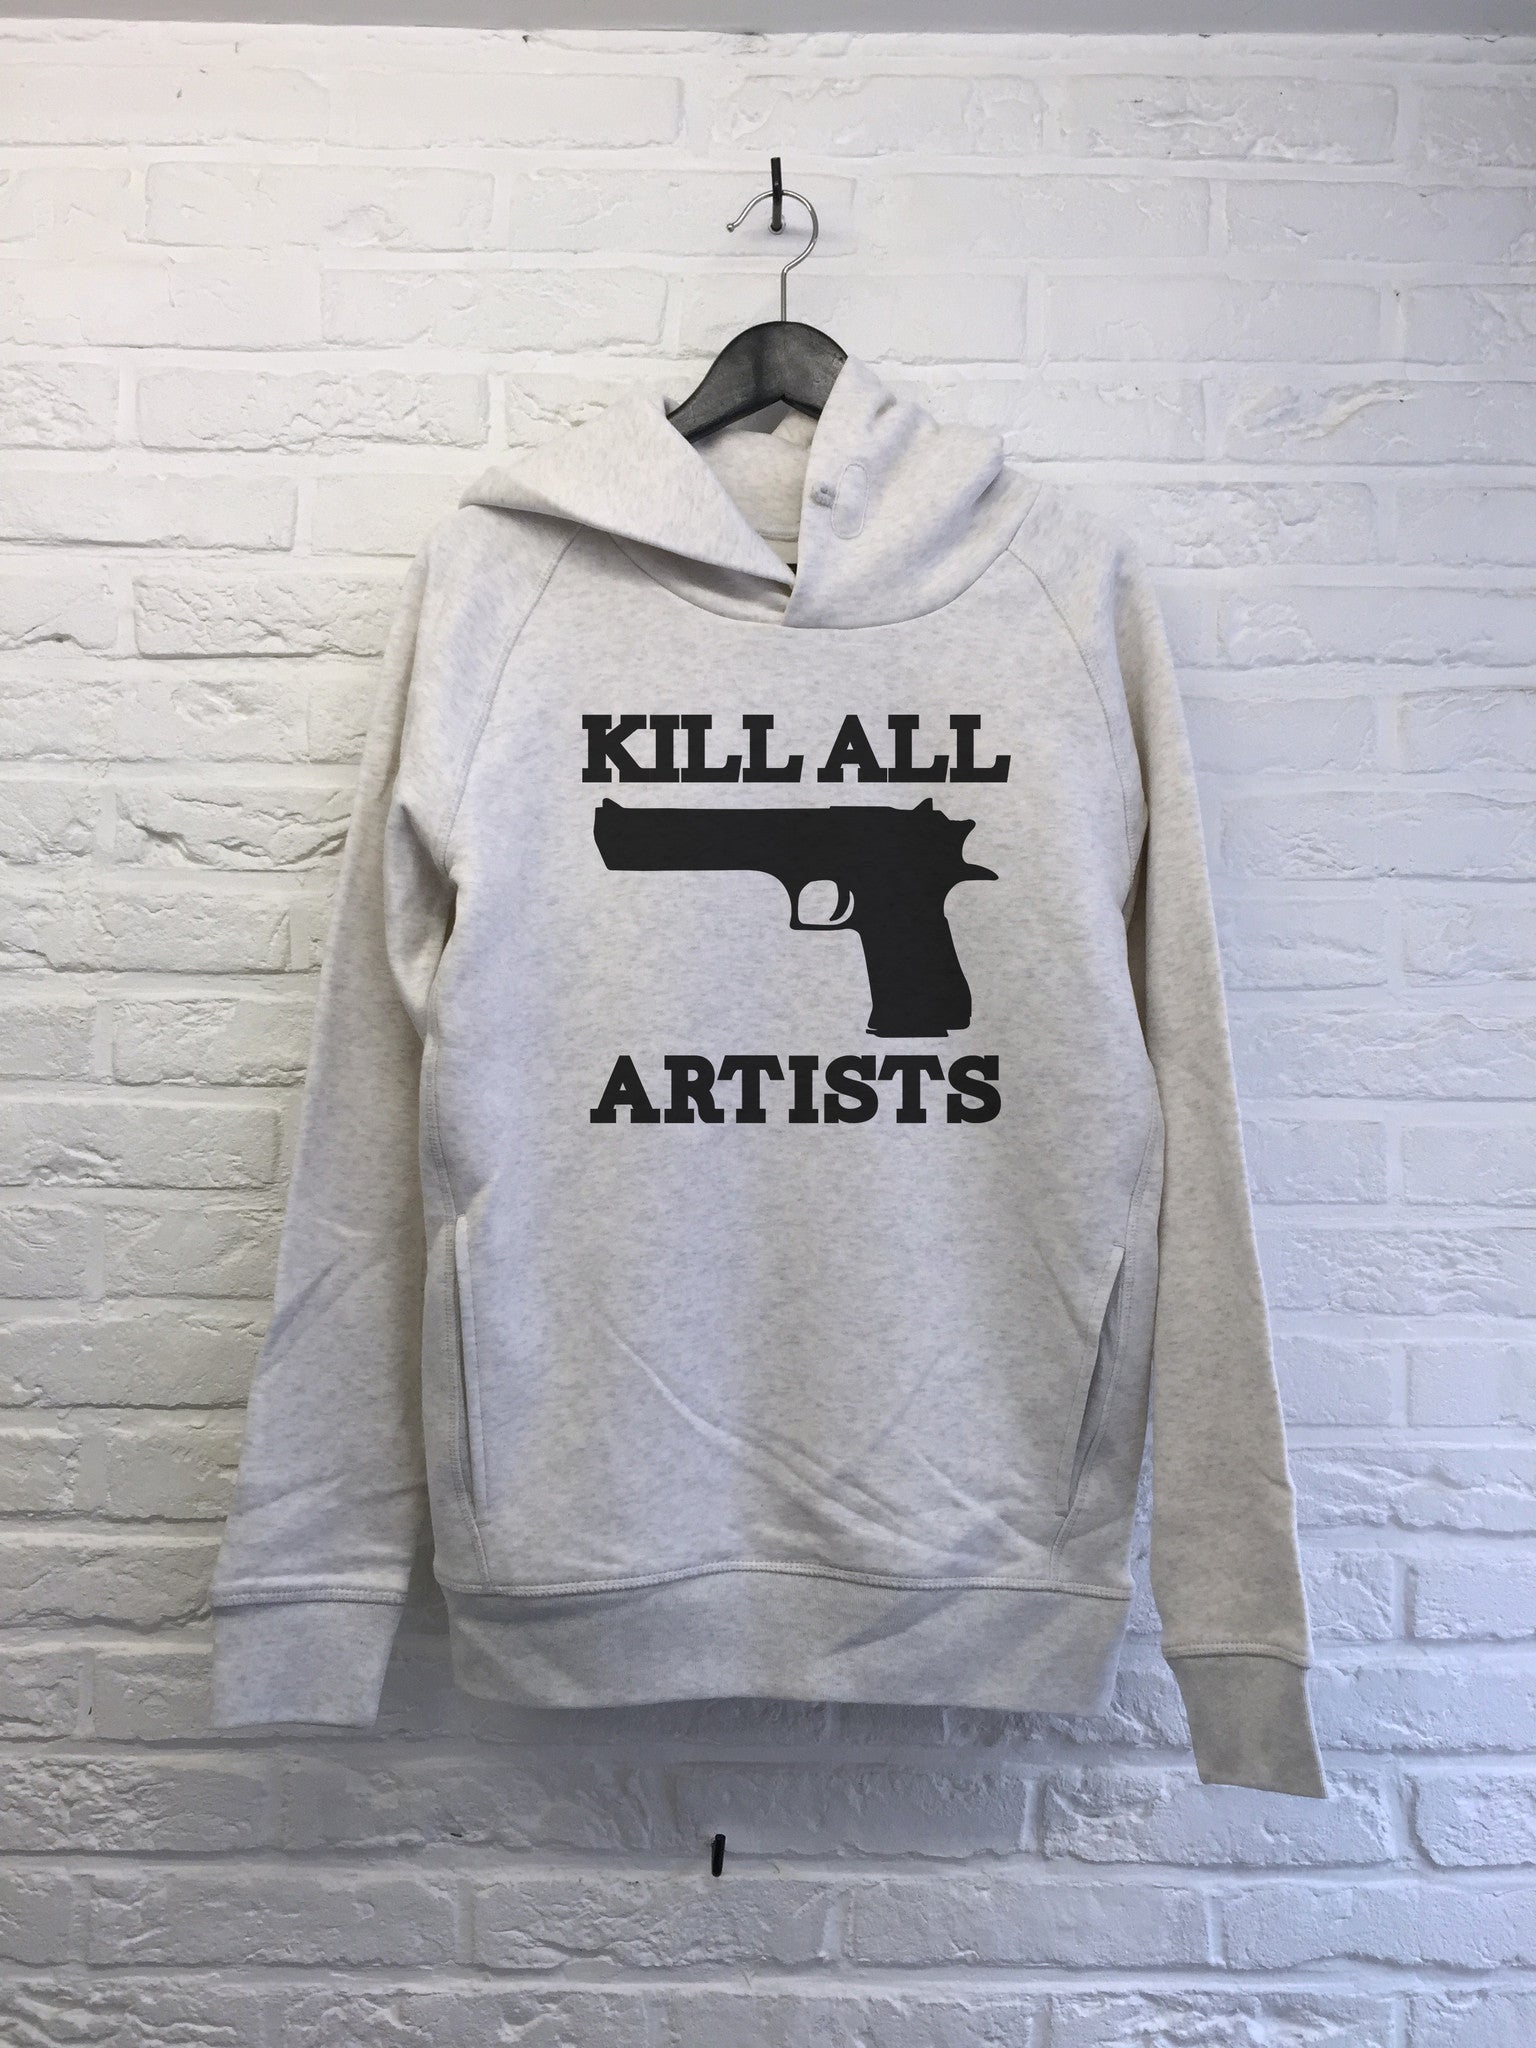 Kill all artists - Hoodie Deluxe-Sweat shirts-Atelier Amelot